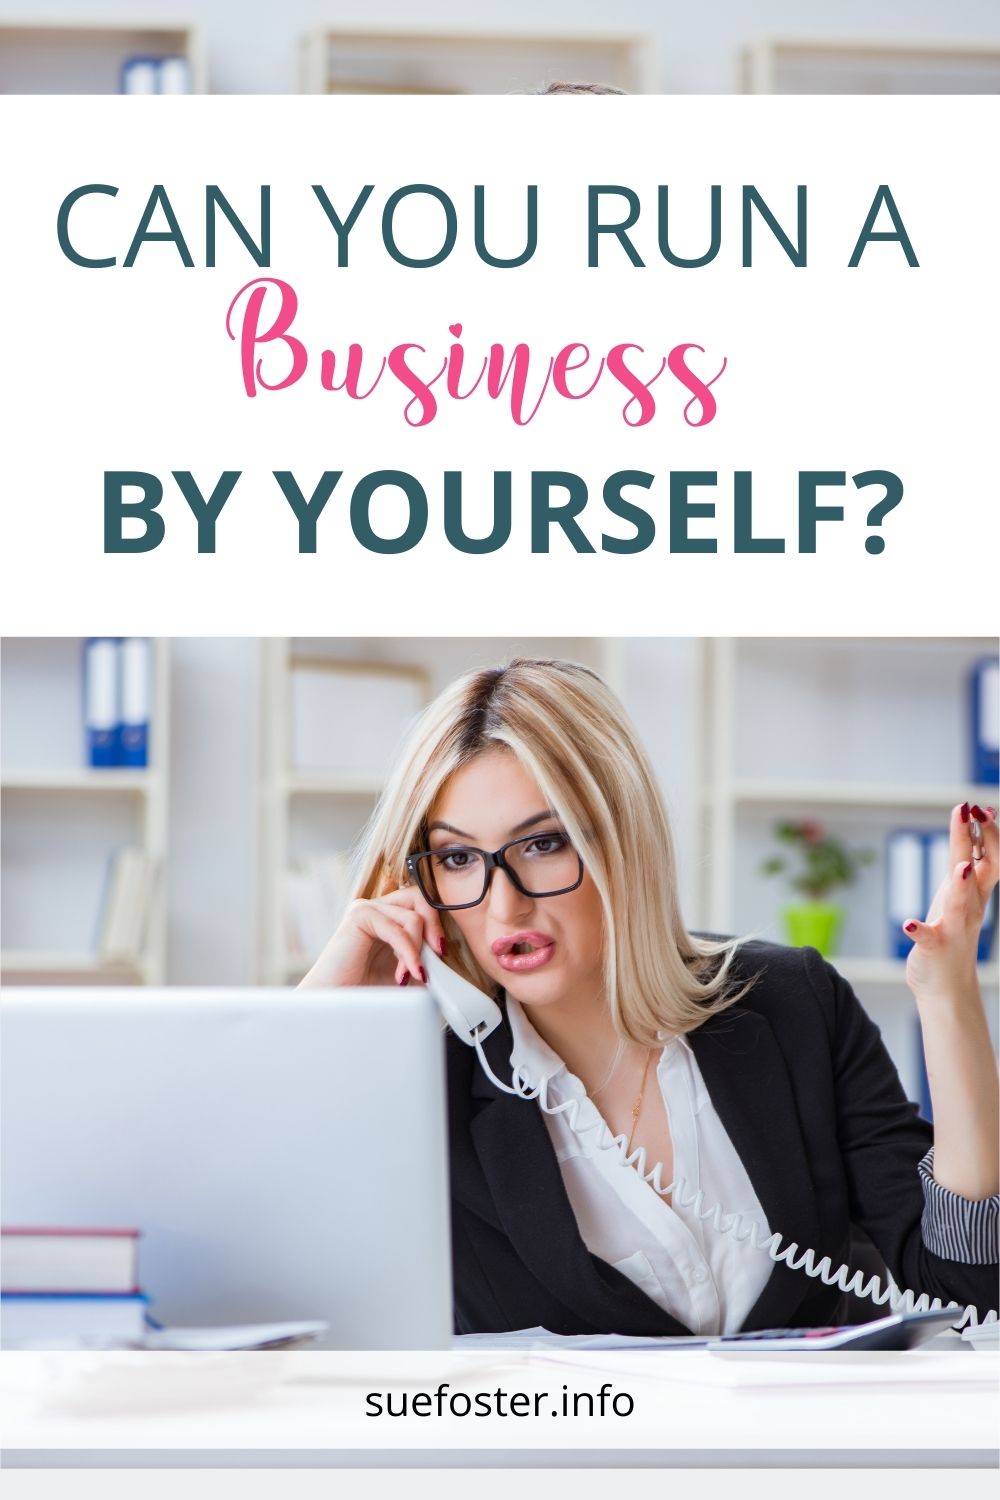 Is it possible to run a business on your own without running the risk of burnout?